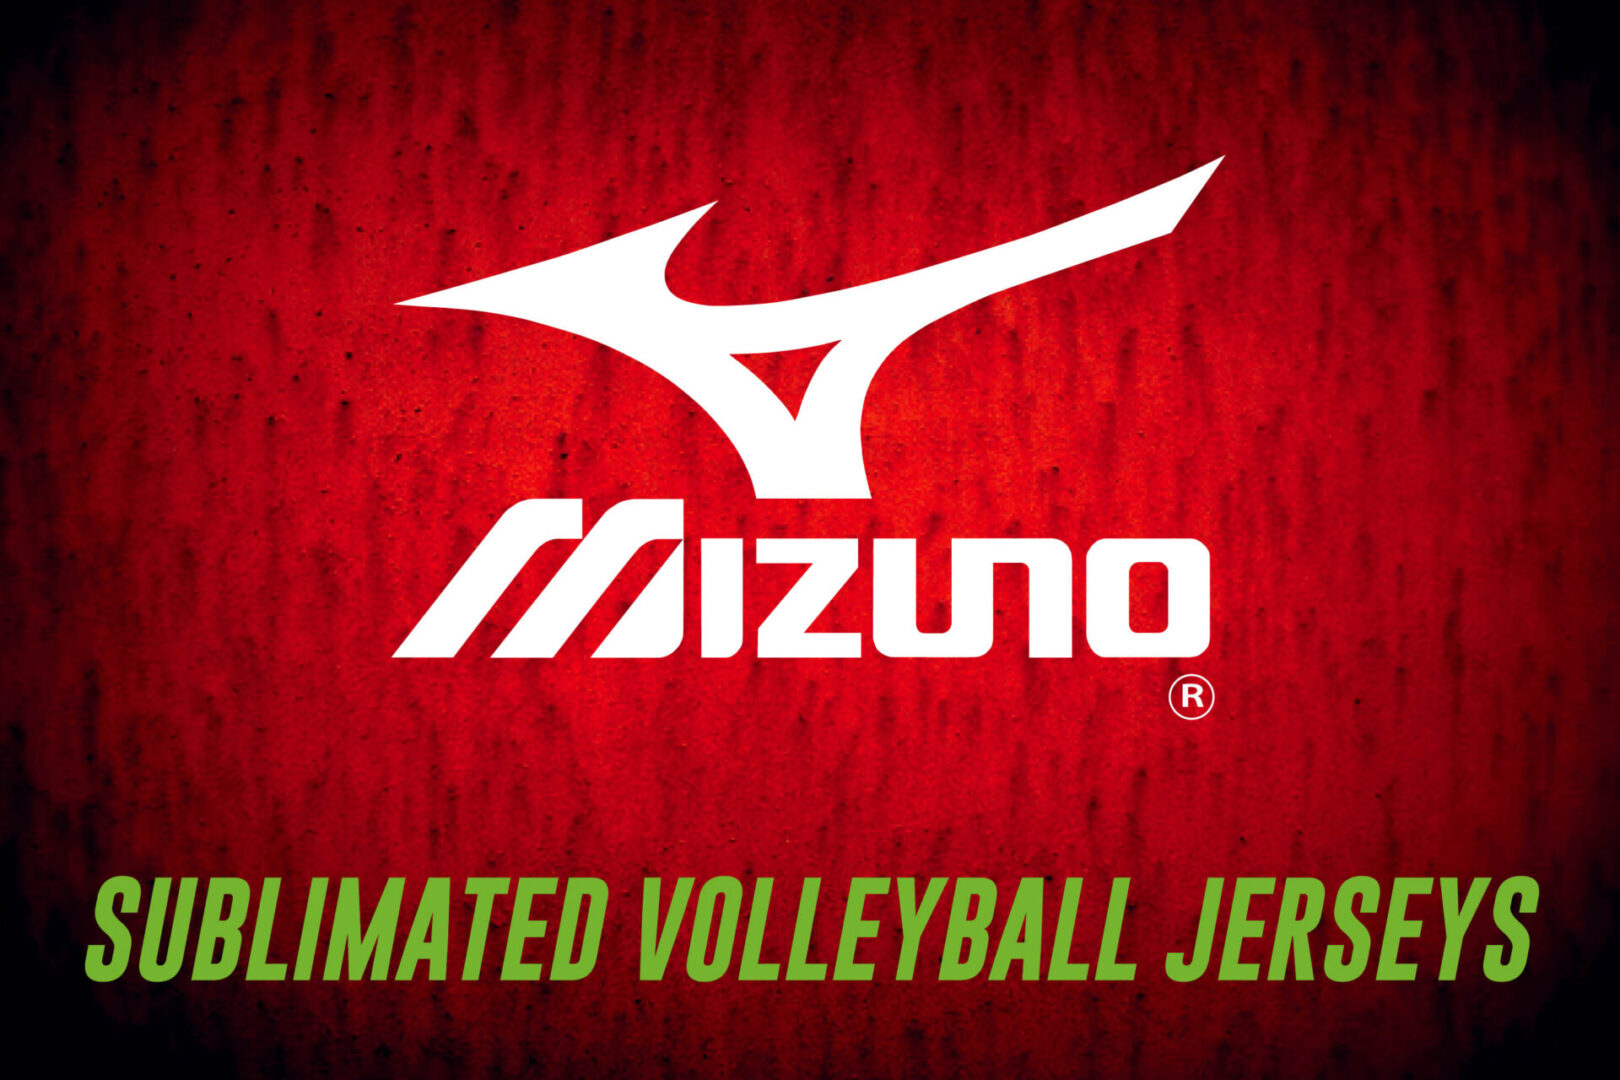 A red background with the mizuno logo.